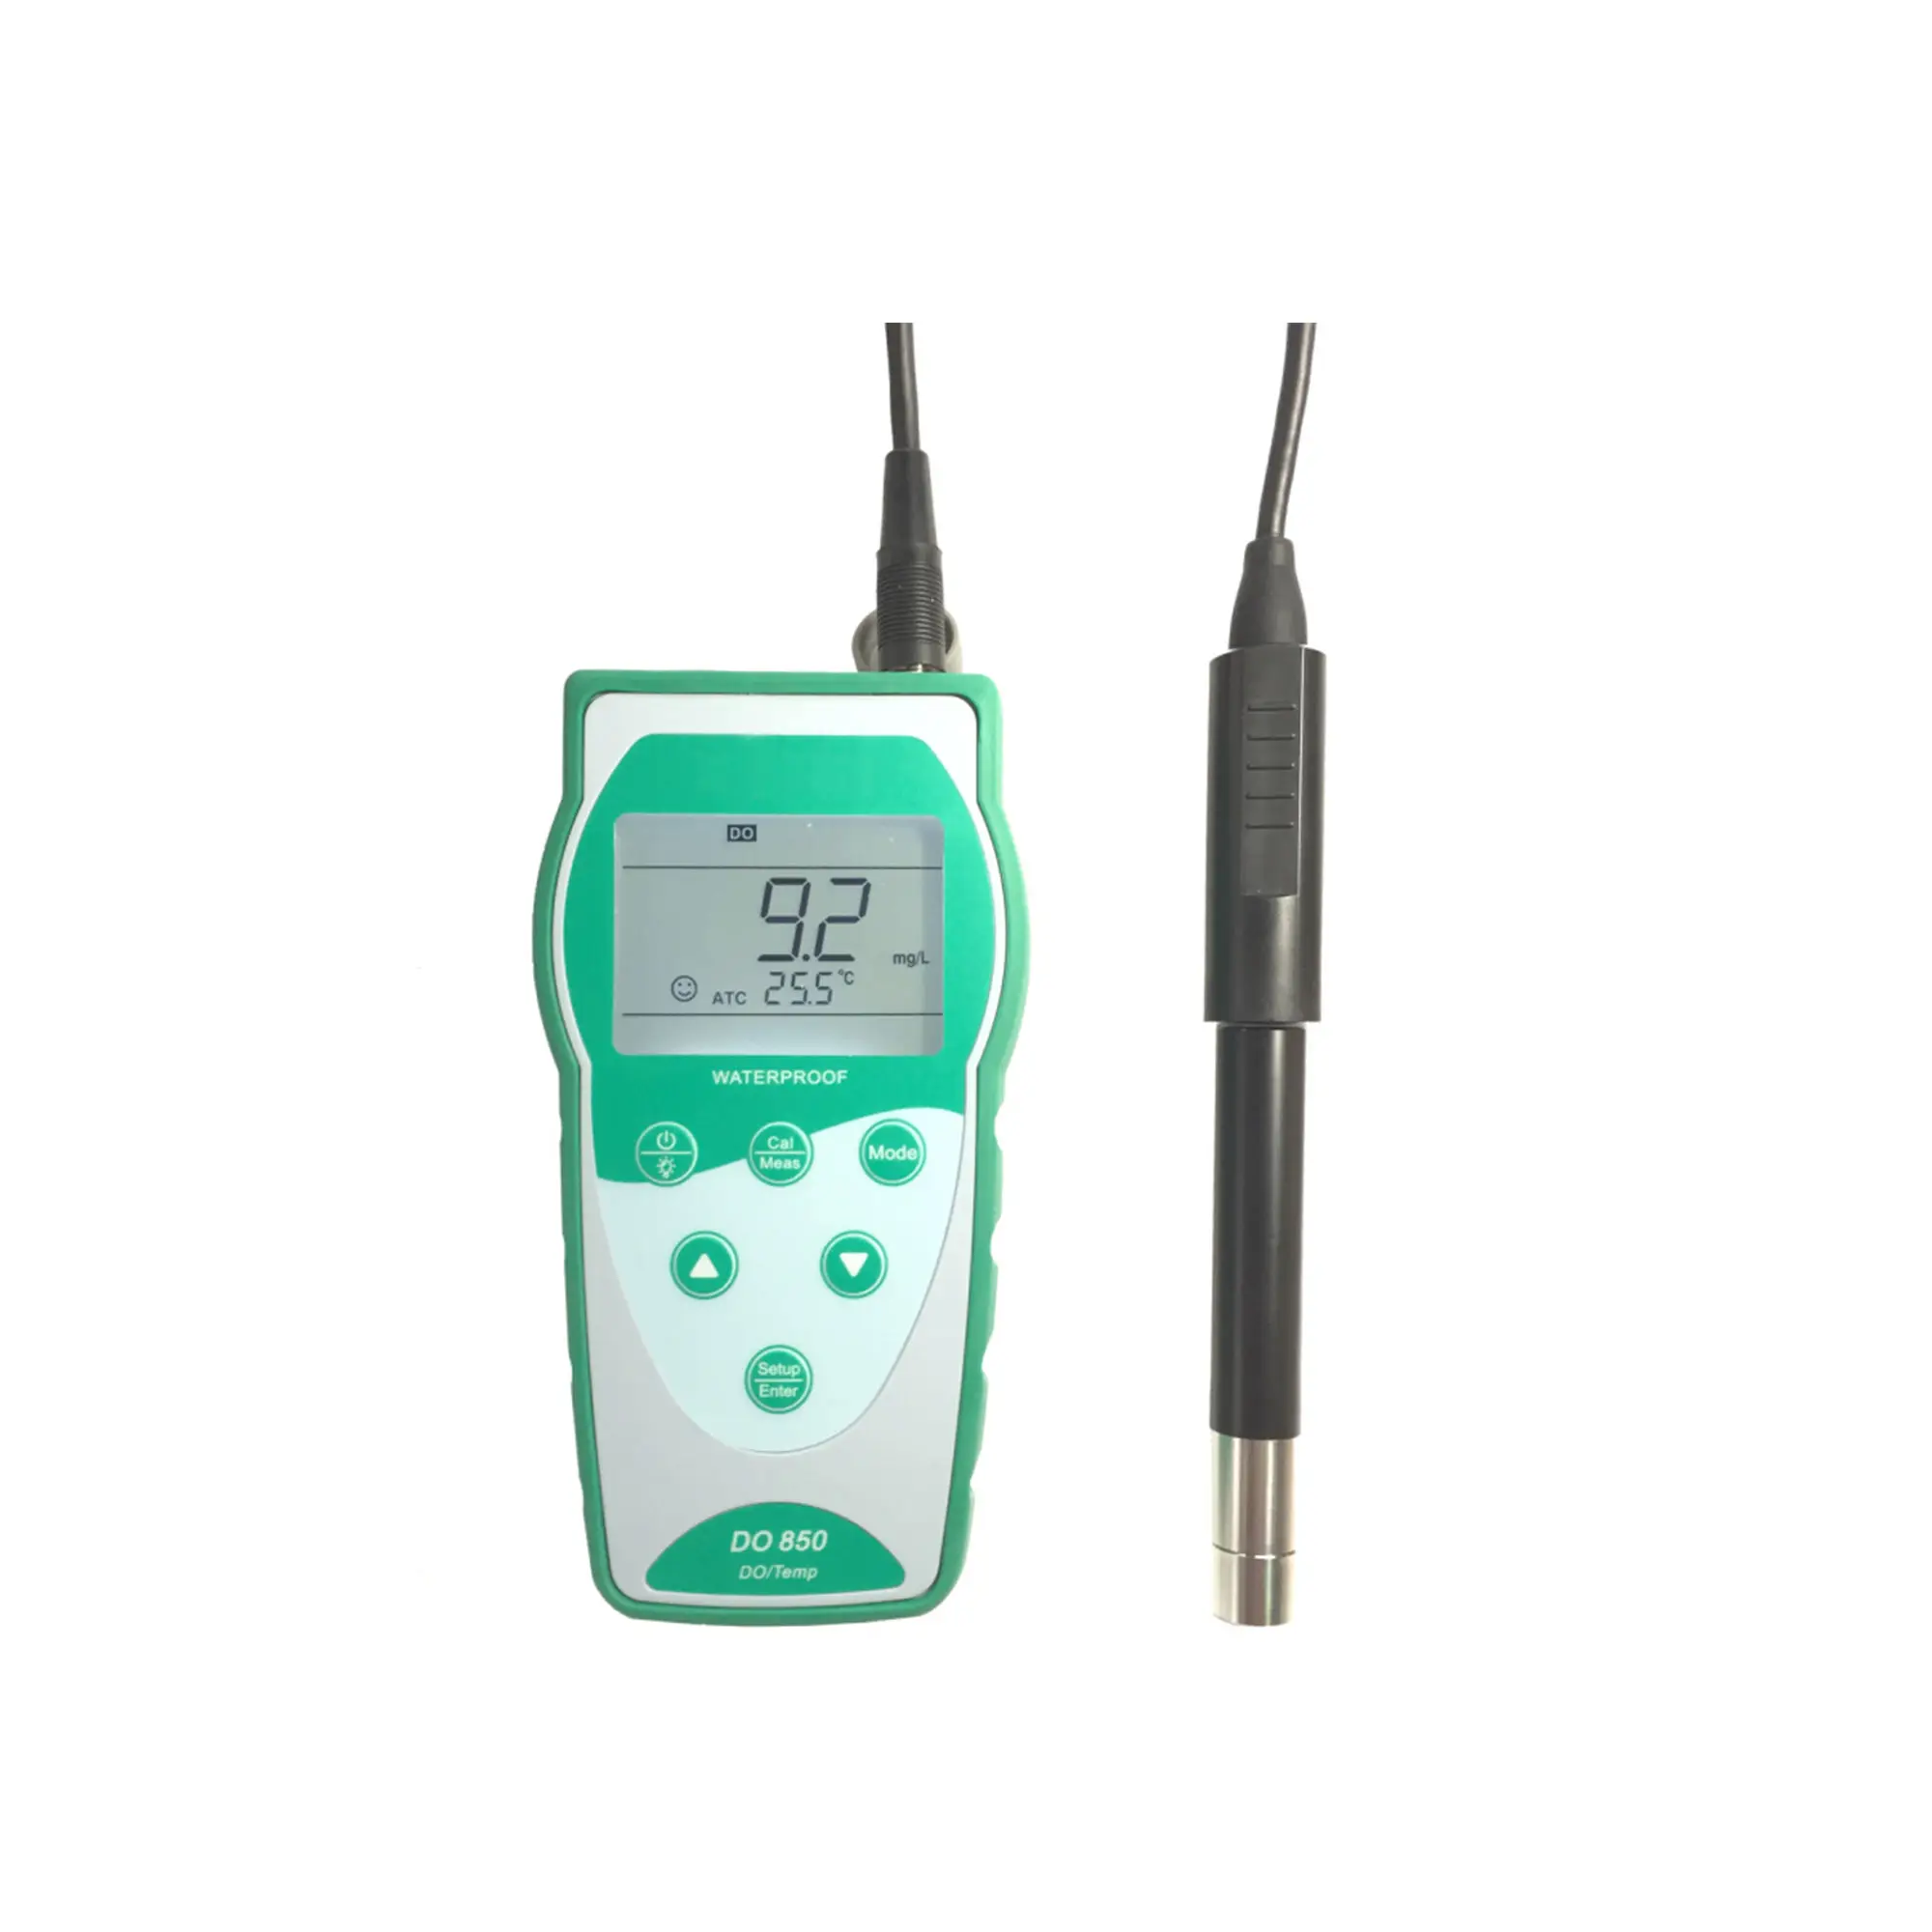 

NADE DO850 0-20.00mg/L(ppm) LCD display Portable Optical DO Meter for Dissolved Oxygen test